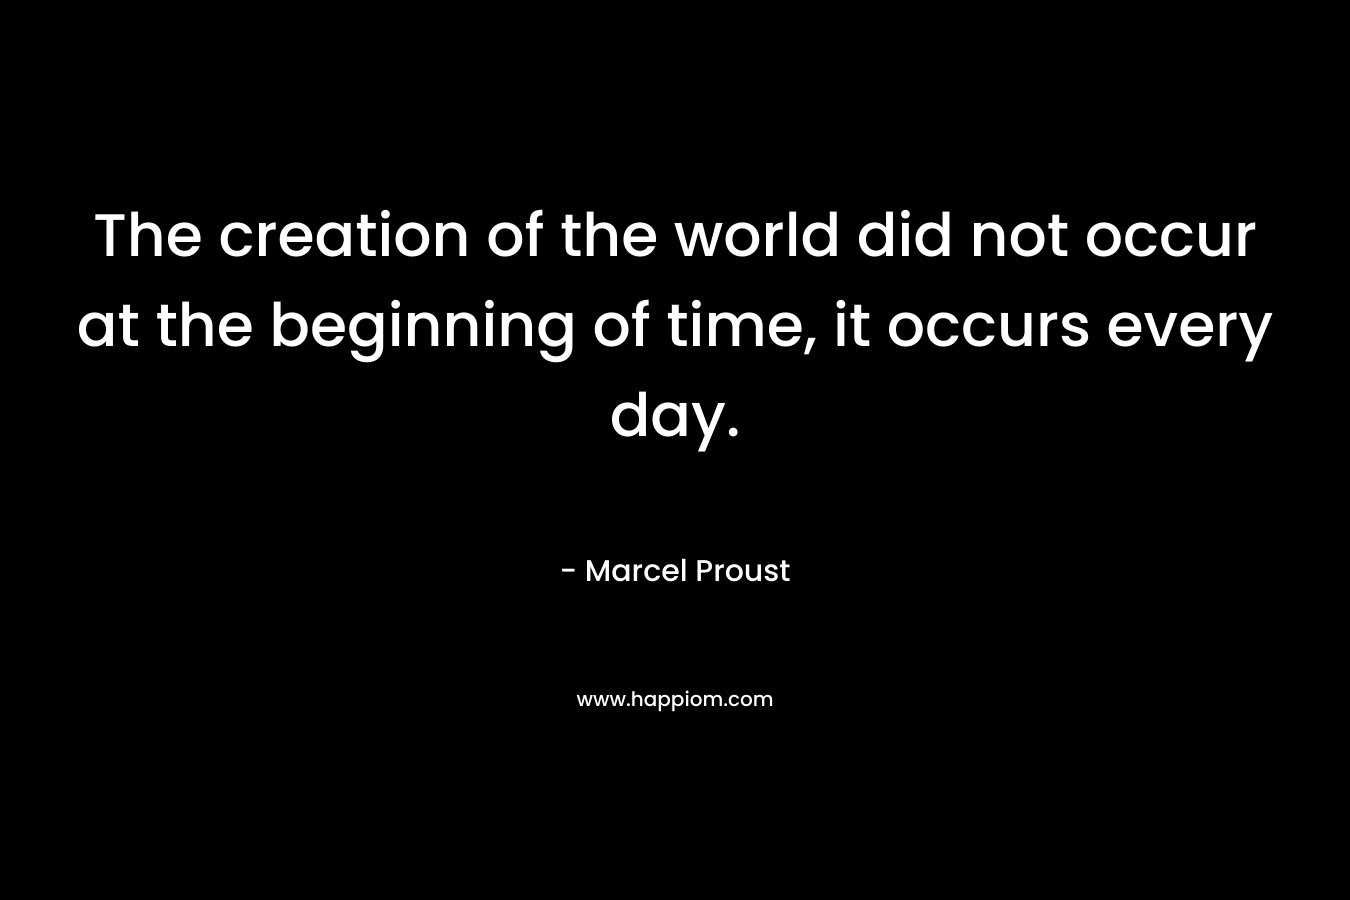 The creation of the world did not occur at the beginning of time, it occurs every day.